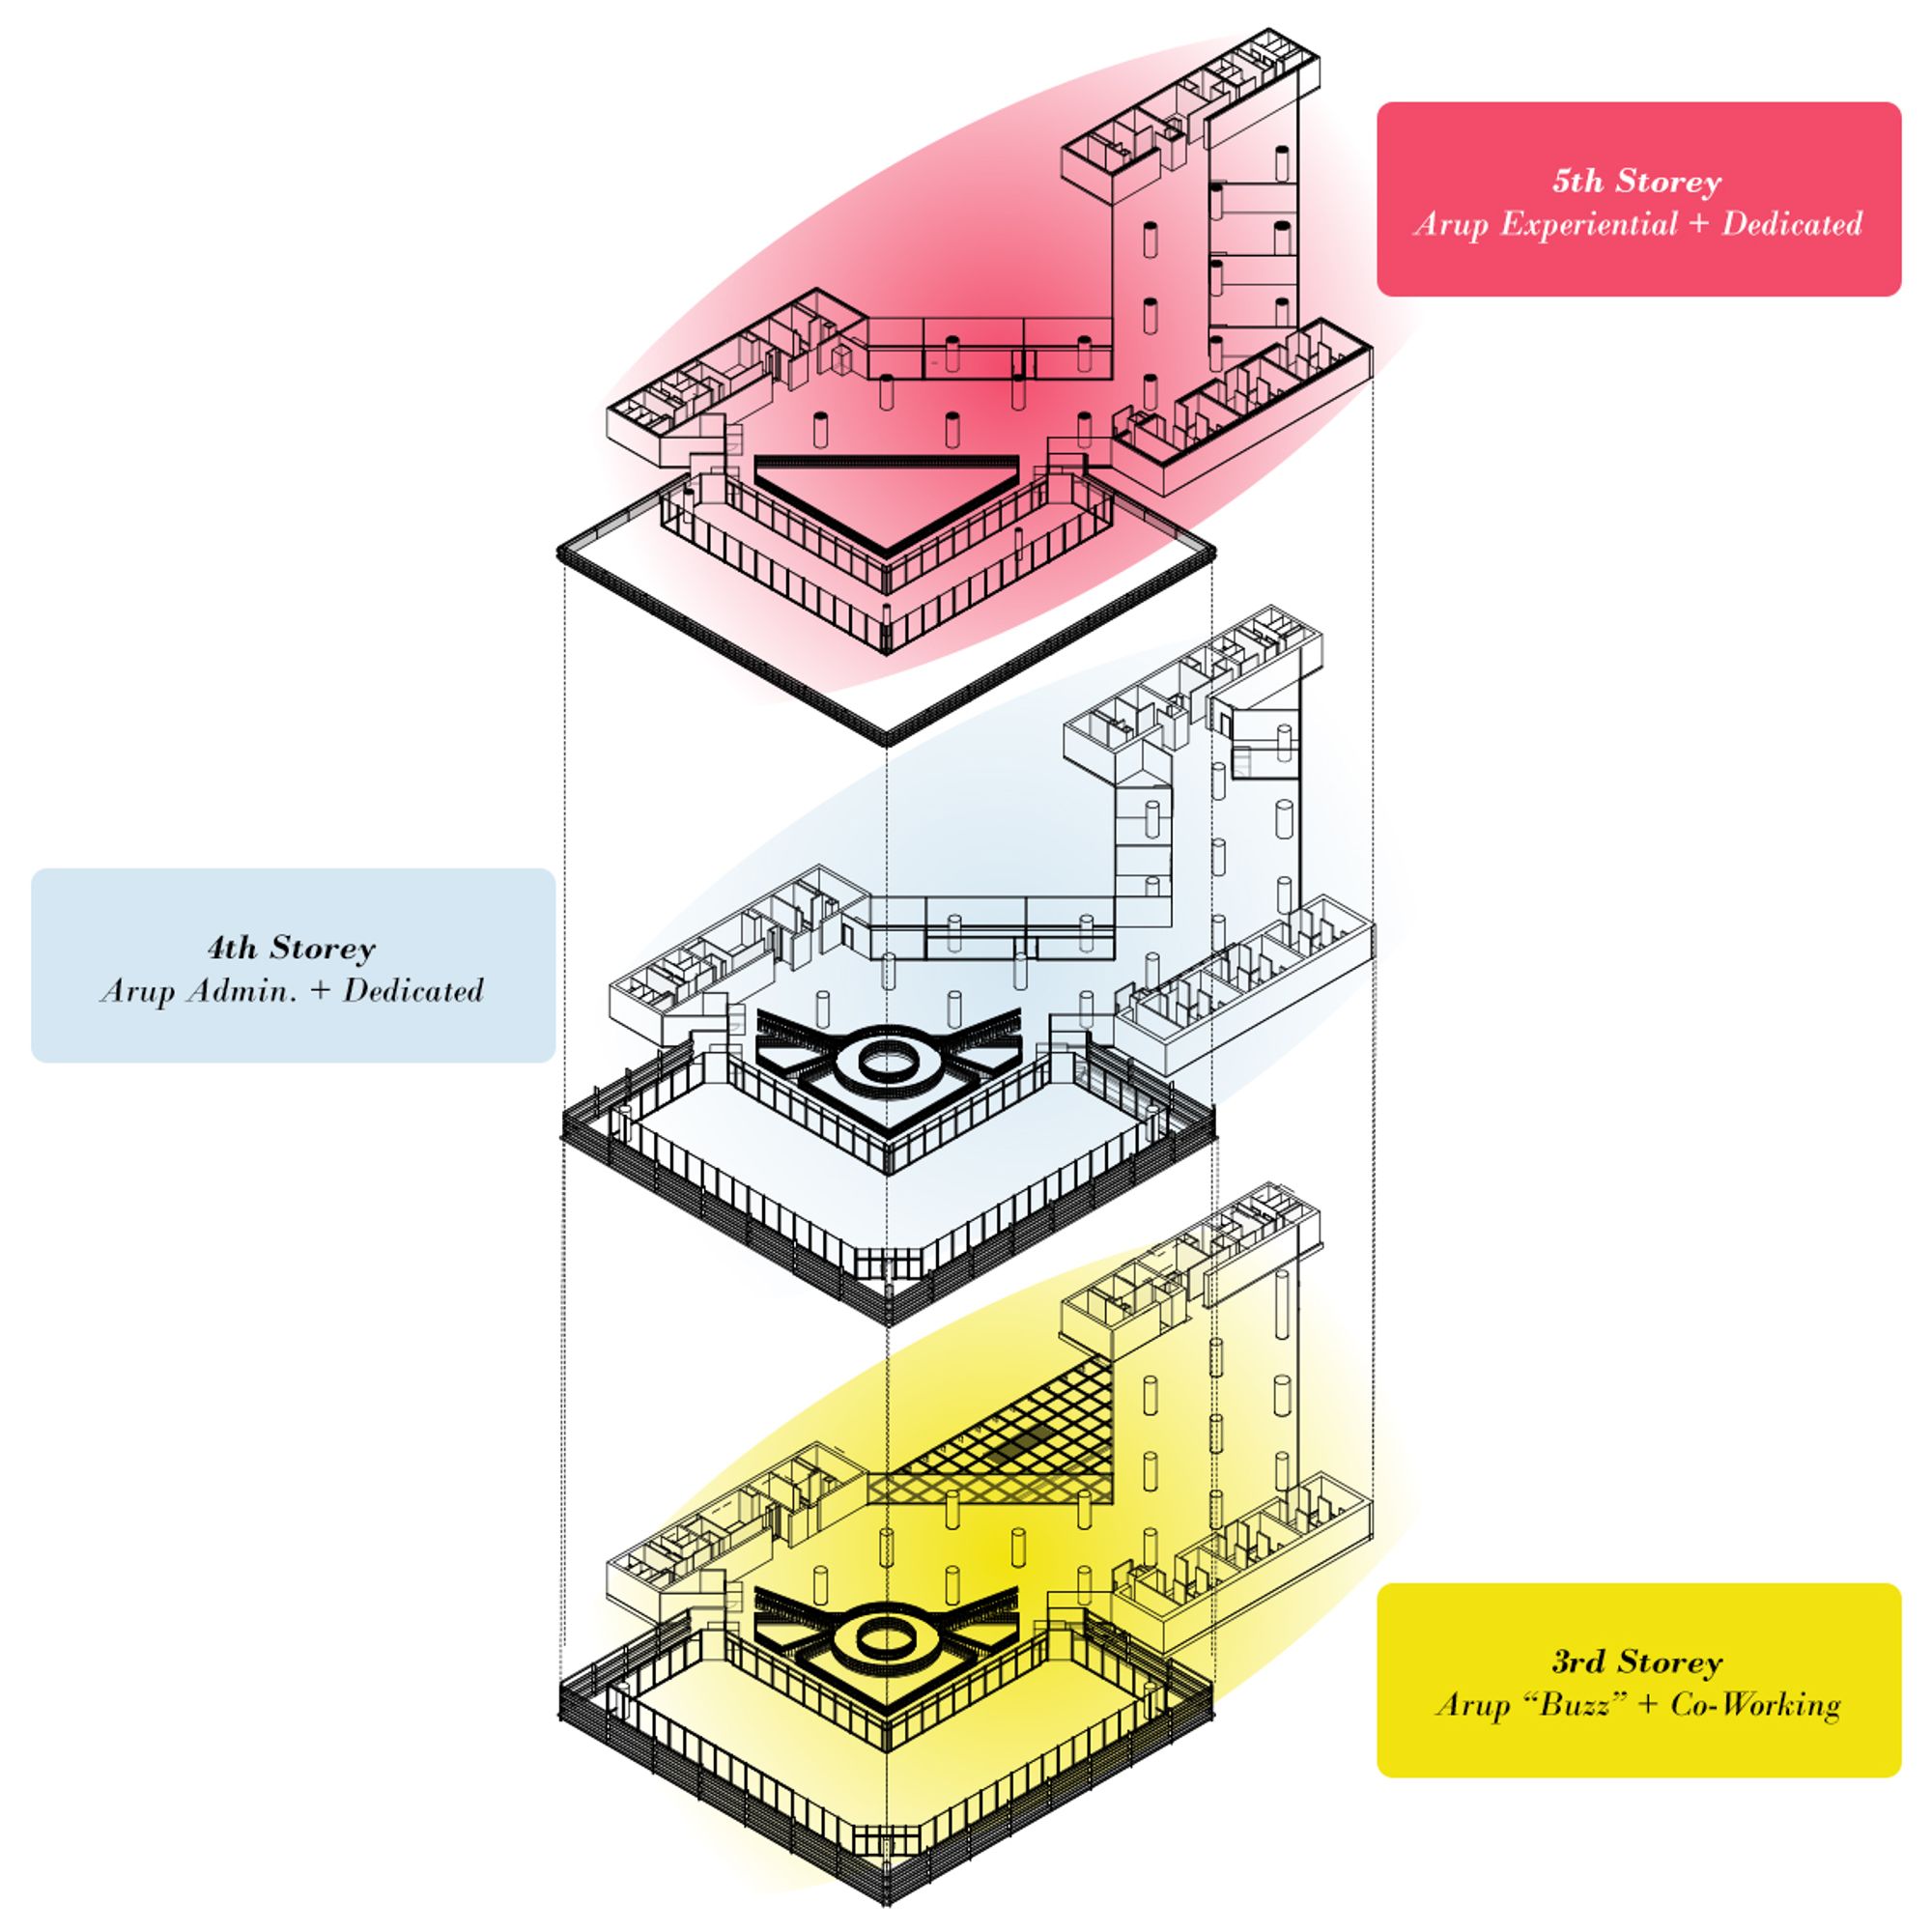 A proposal for a semi-public co-working space on the 3rd Storey demonstrating Arup’s democratized emergent technologies